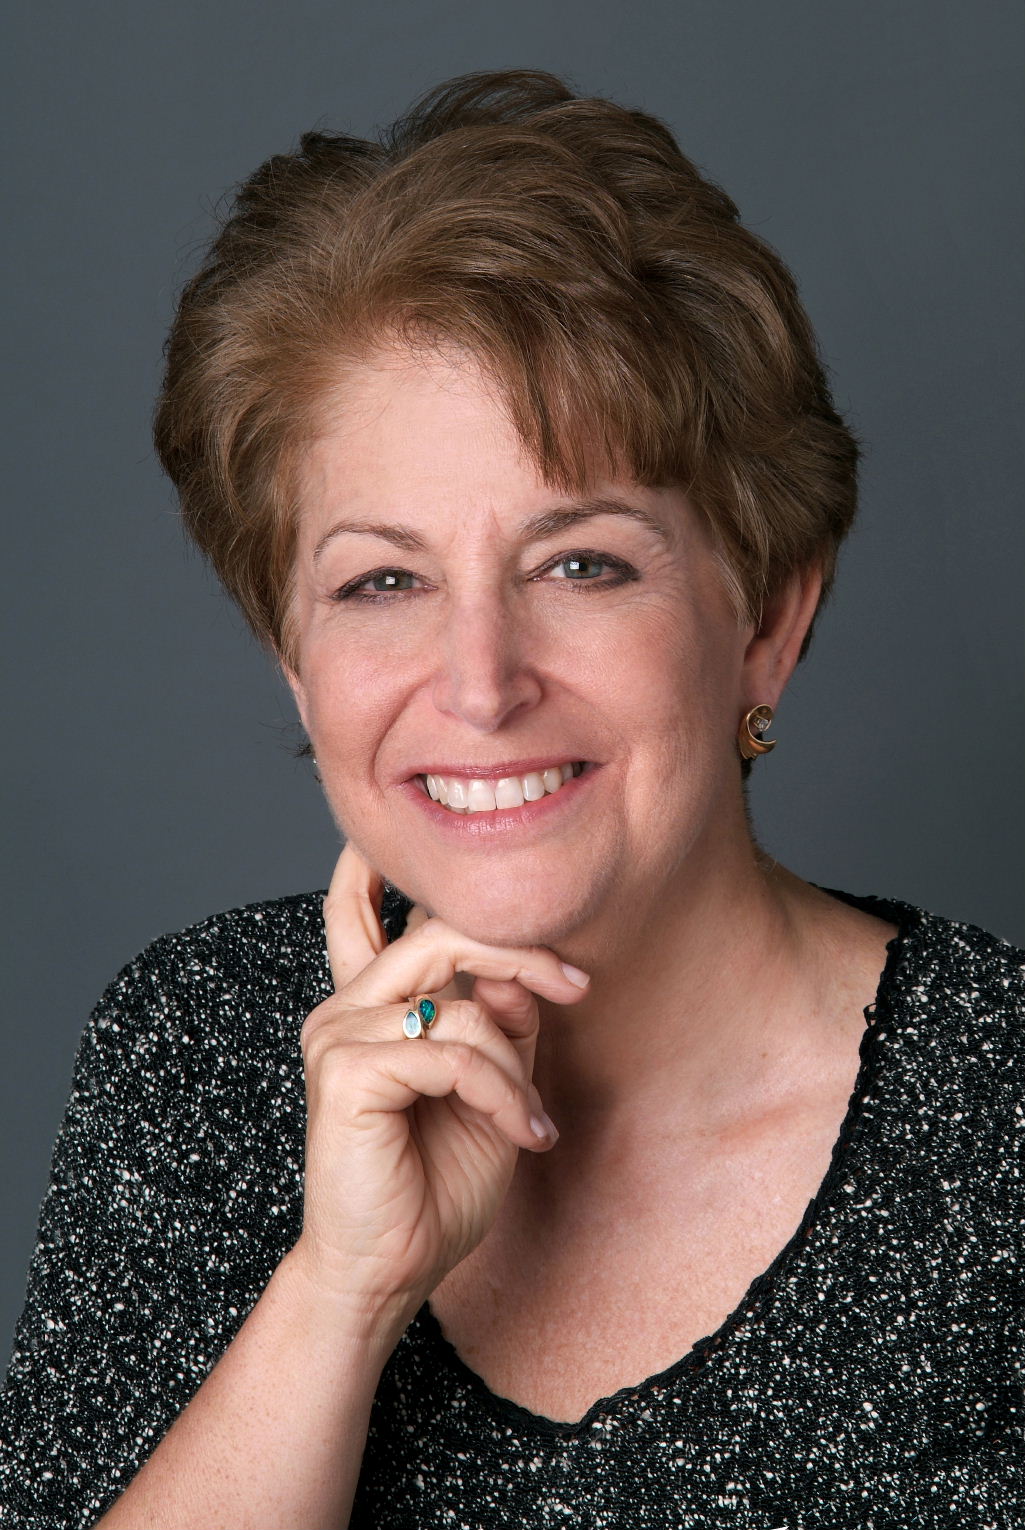 A portrait of Dr. Diane with short, brown wavy hair, smiling with her right hand on her right cheek. She is wearing a black and white speckled, v-neck blouse.